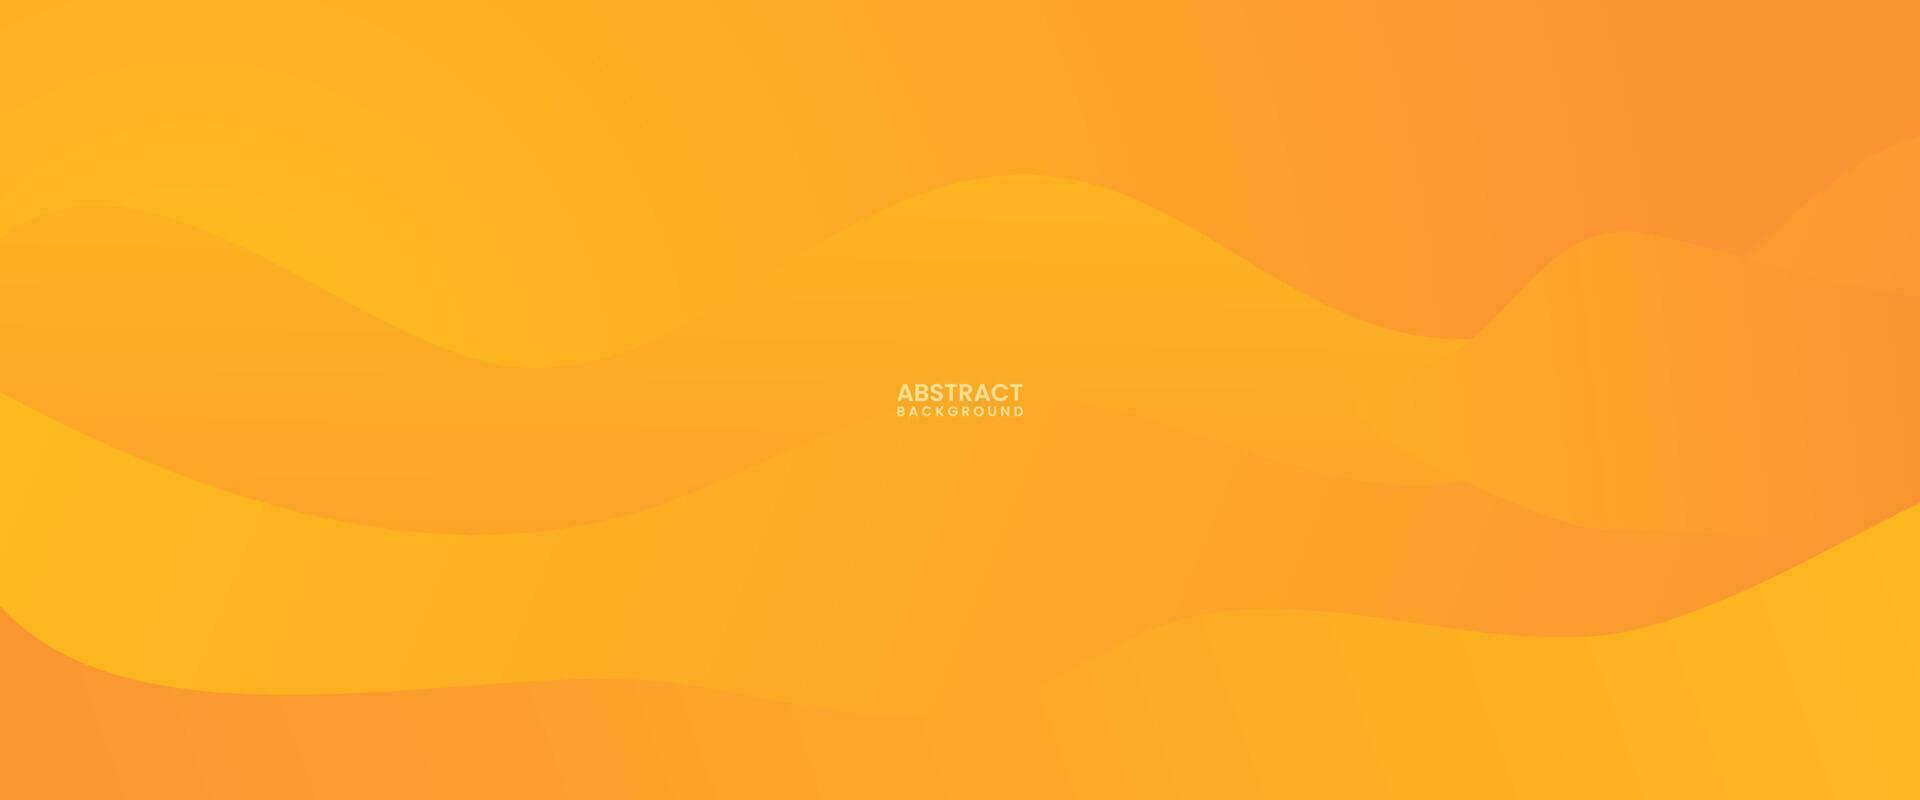 abstract orange colorful gradient background vector illustration